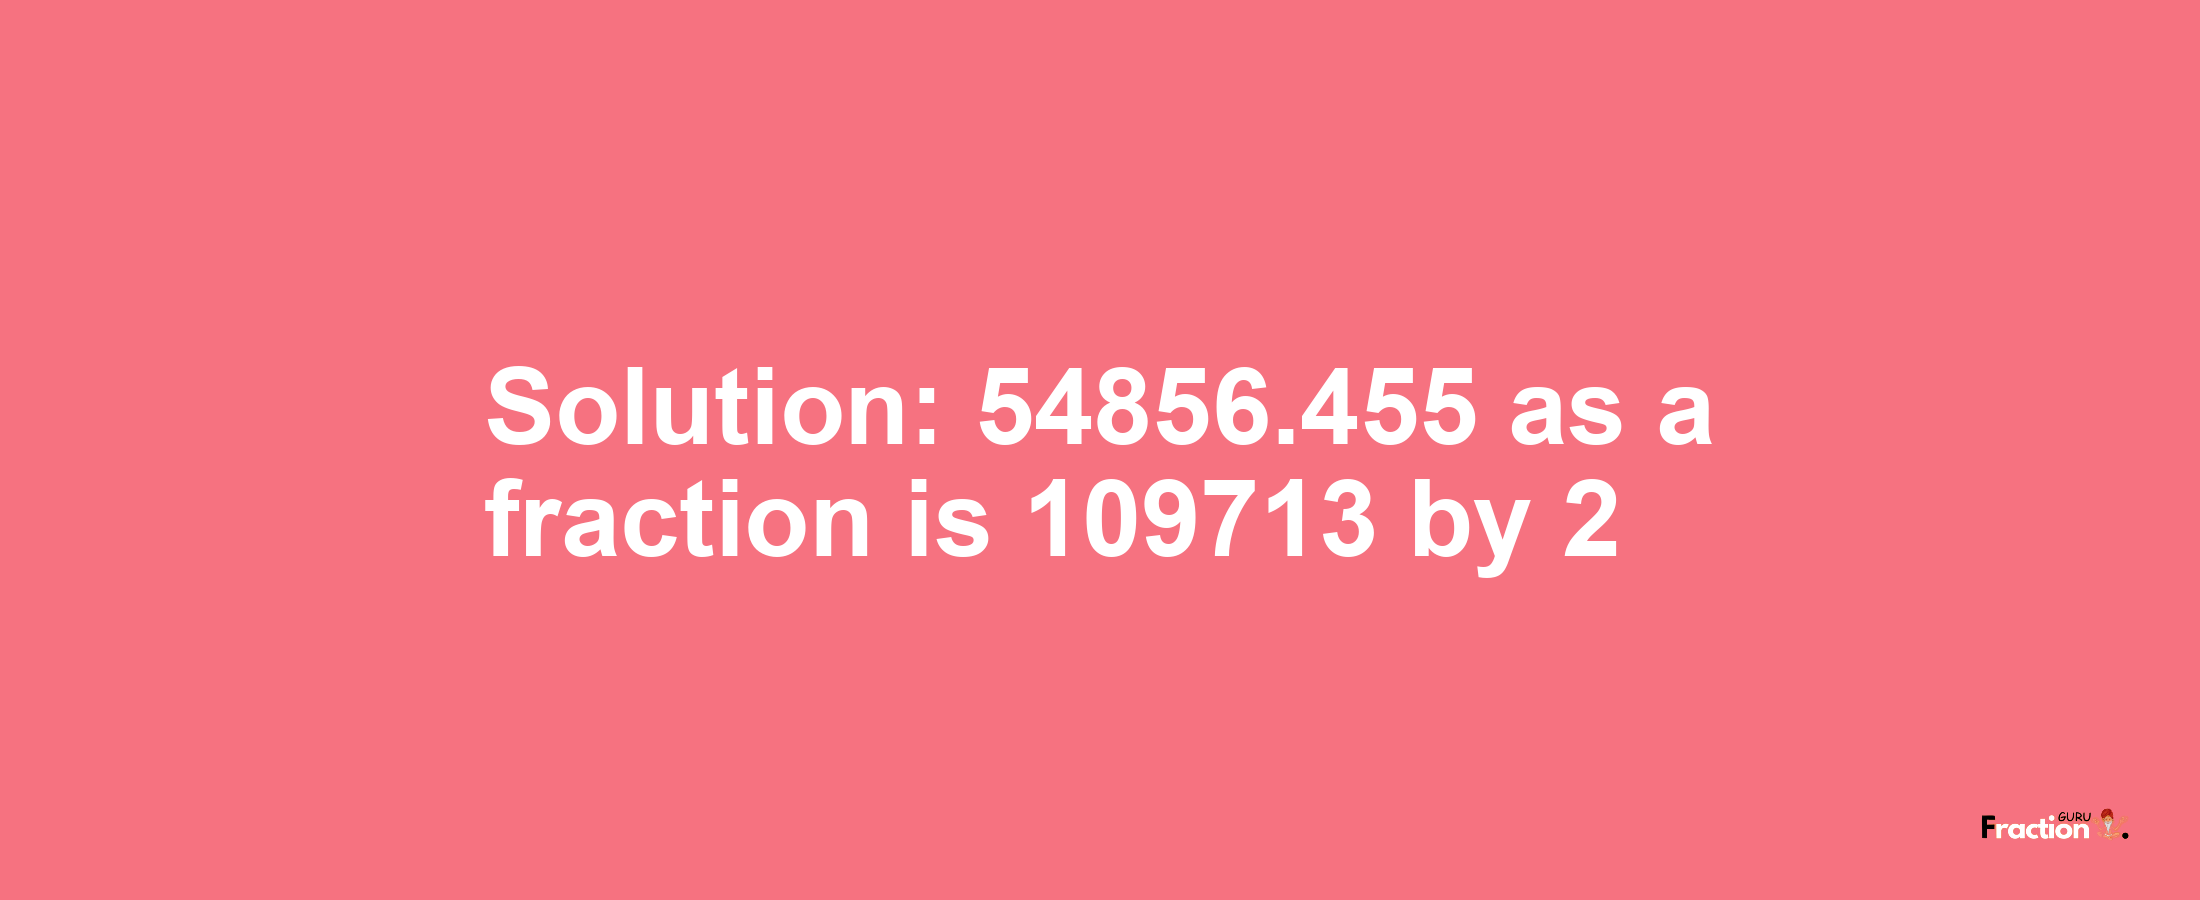 Solution:54856.455 as a fraction is 109713/2